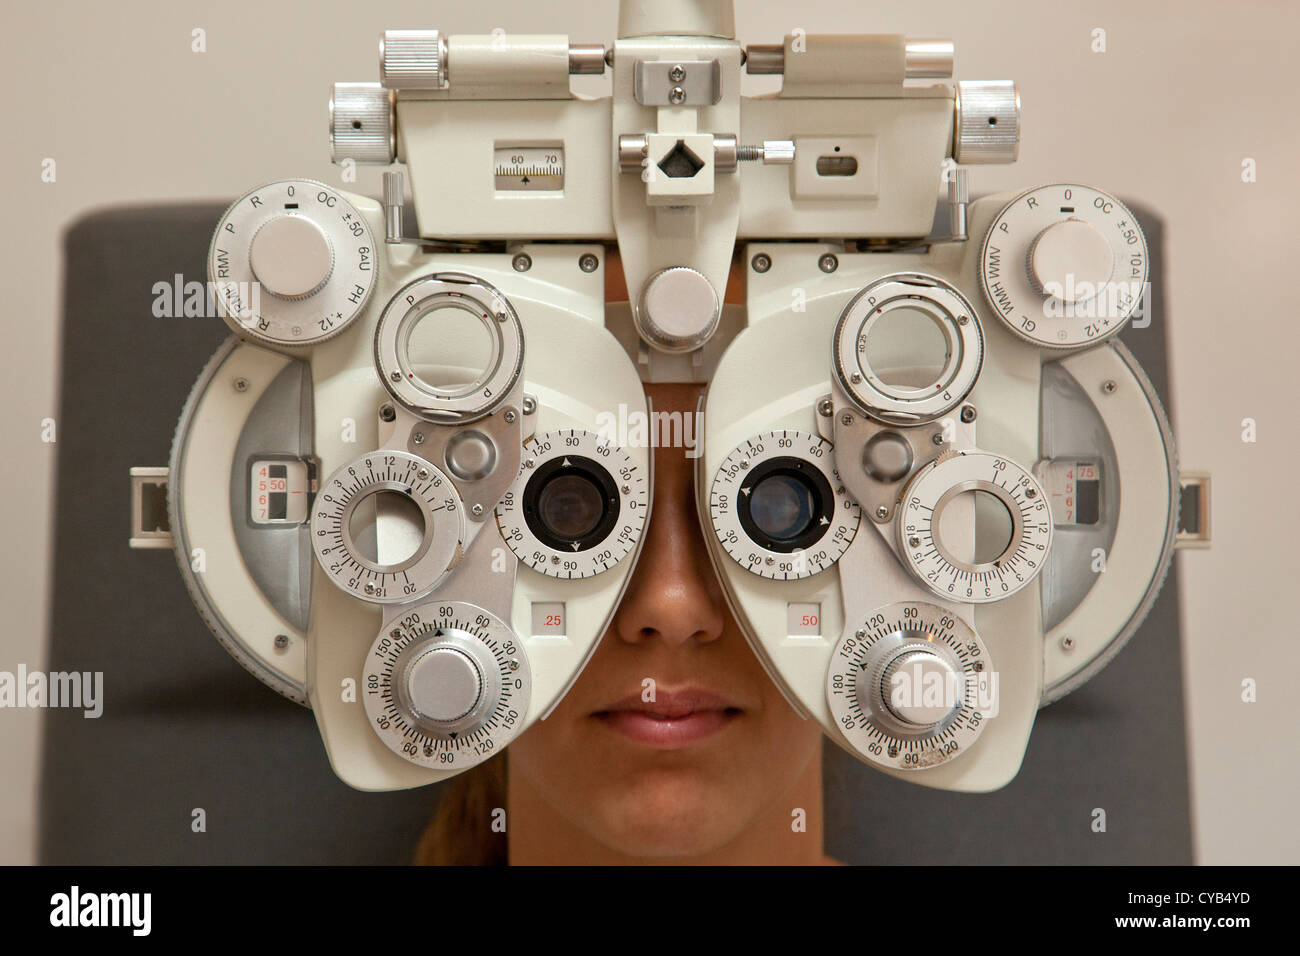 woman patient having an eye test examination on a Reichert ultramatic phoropter, autorefractometer instrument in eye clinic. Stock Photo